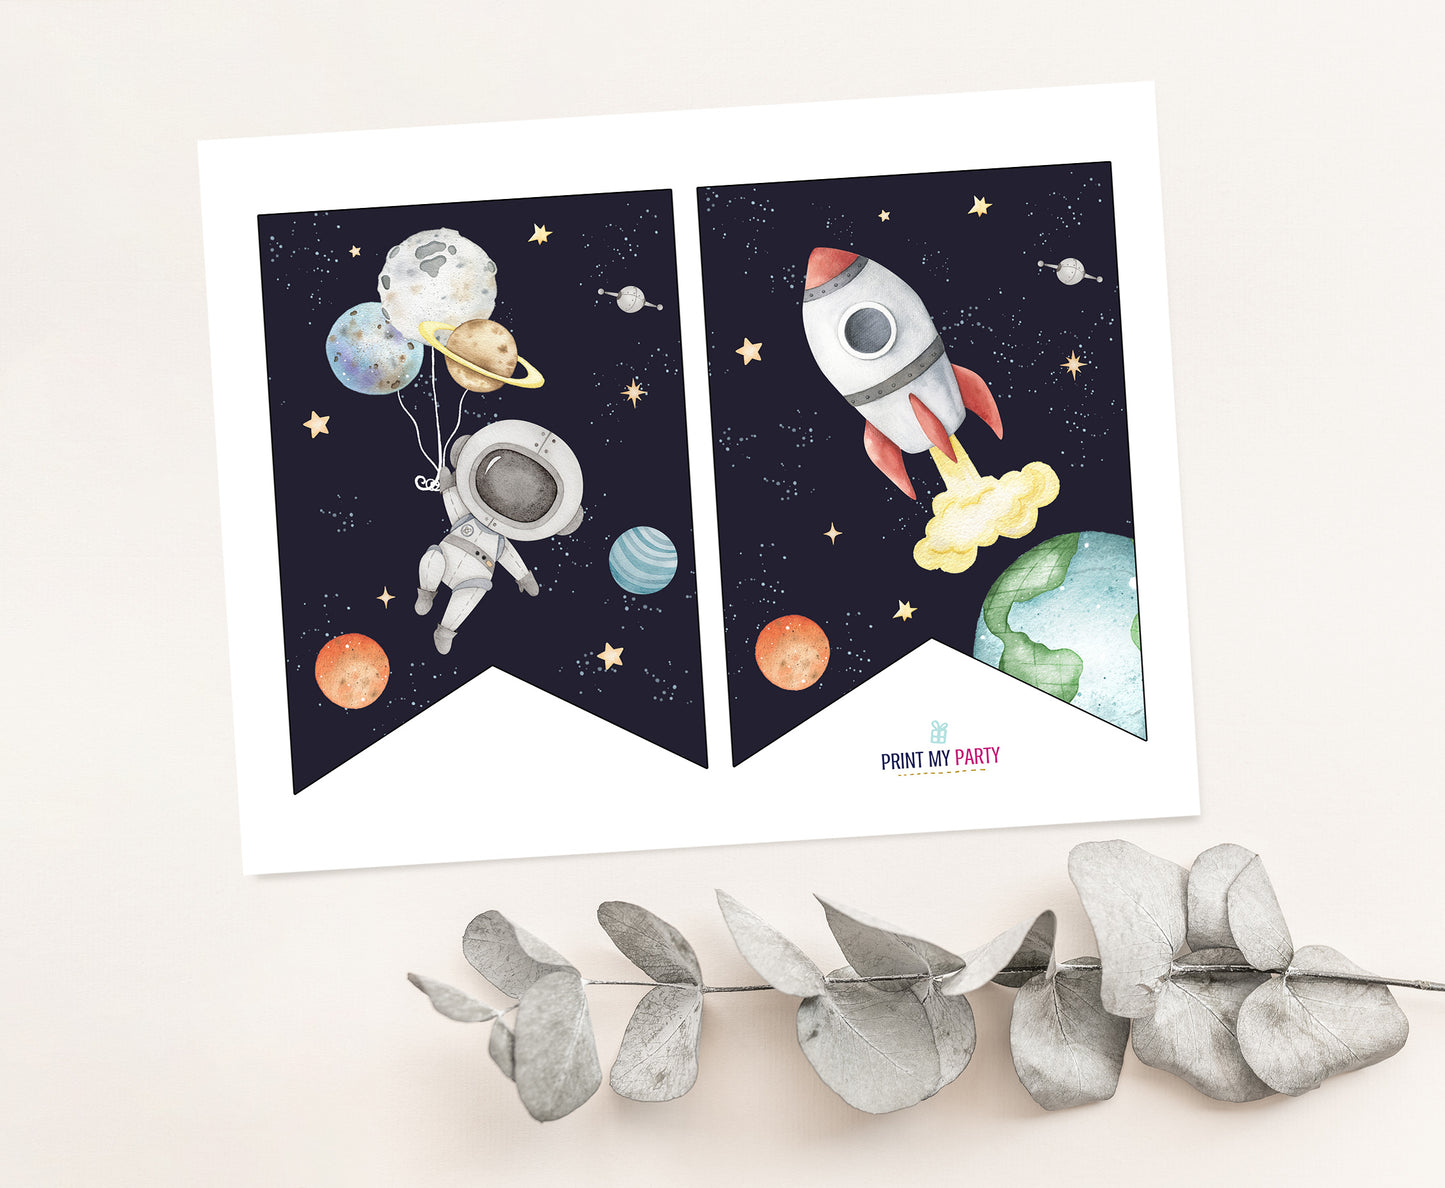 Space ONE Banner High Chair | Astronaut 1st Birthday Party Decorations - 39C